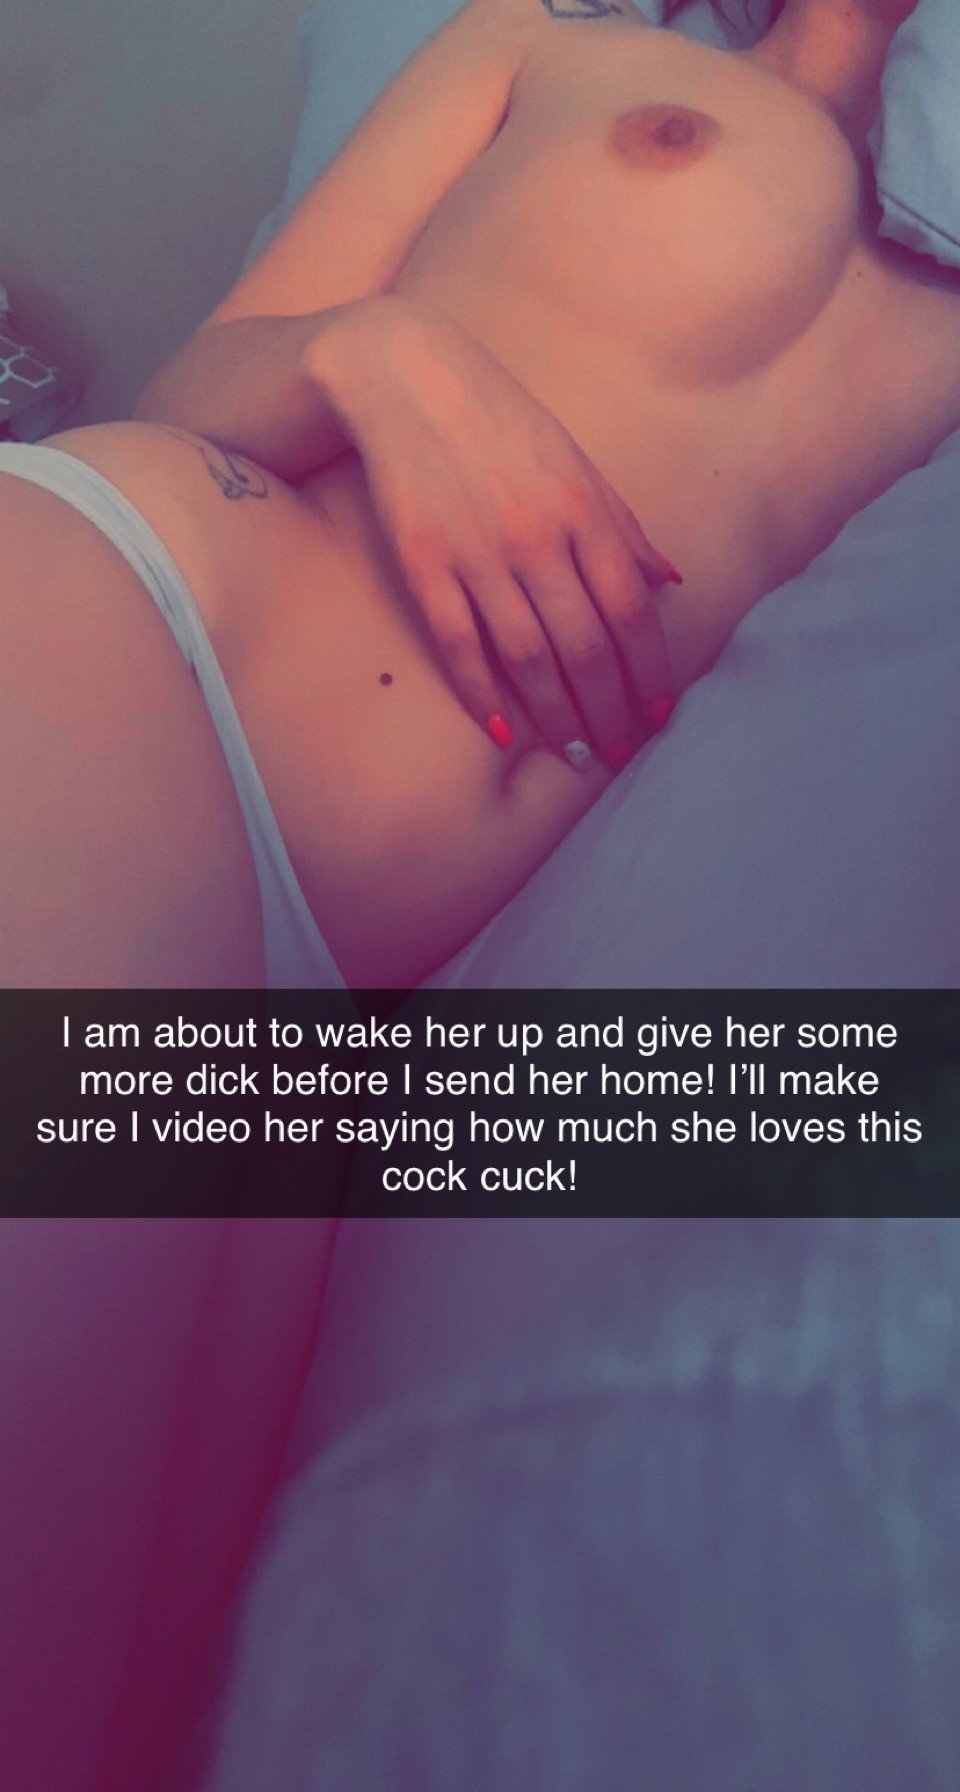 Photo by Cuckoldjd with the username @Cuckoldjd,  April 16, 2022 at 2:27 PM. The post is about the topic Hotwife/Cuckold Snapchat and the text says 'Saturday morning snaps from her bull!'